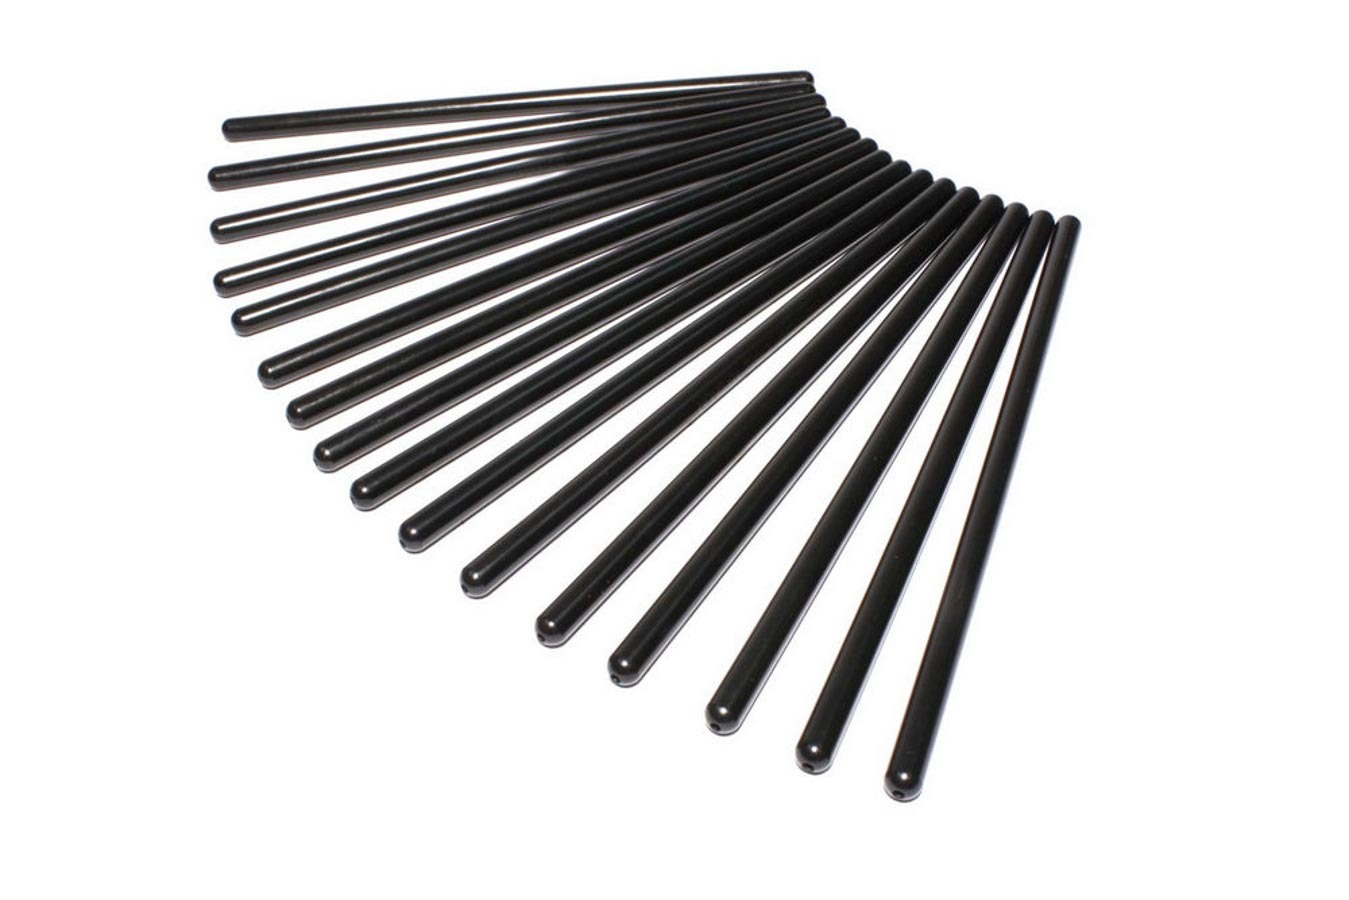 Comp Cams 7472-16 Pushrod, Magnum, 8.150 in Long, 5/16 in Diameter, 0.080 in Thick Wall, Chromoly, Small Block Ford / Chevy / GM V6, Set of 16